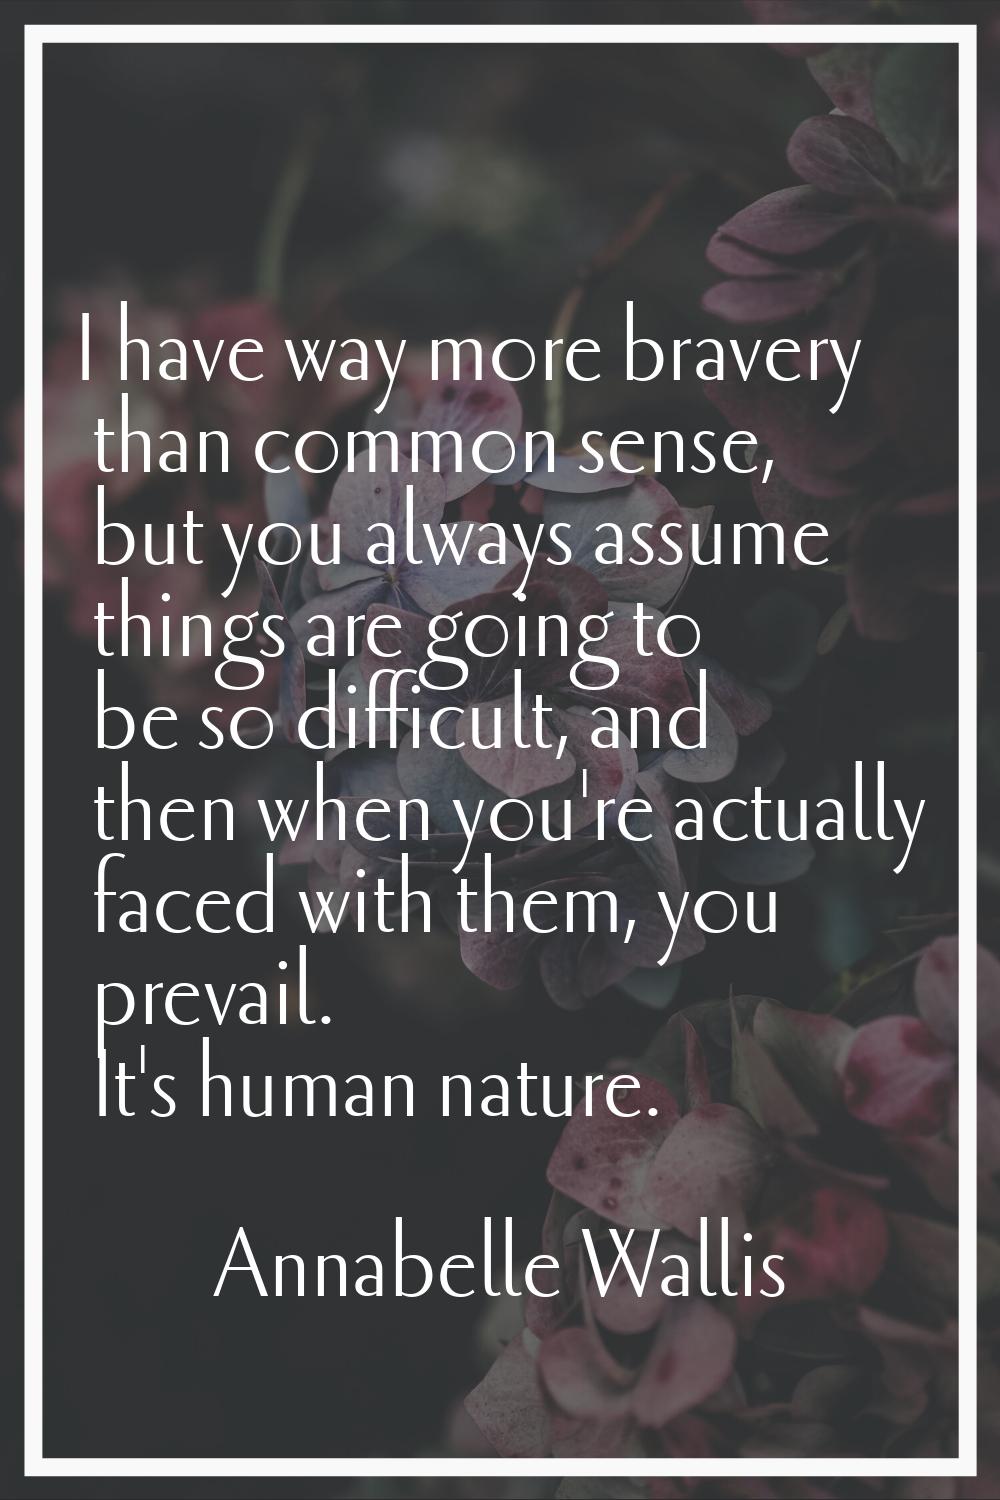 I have way more bravery than common sense, but you always assume things are going to be so difficul